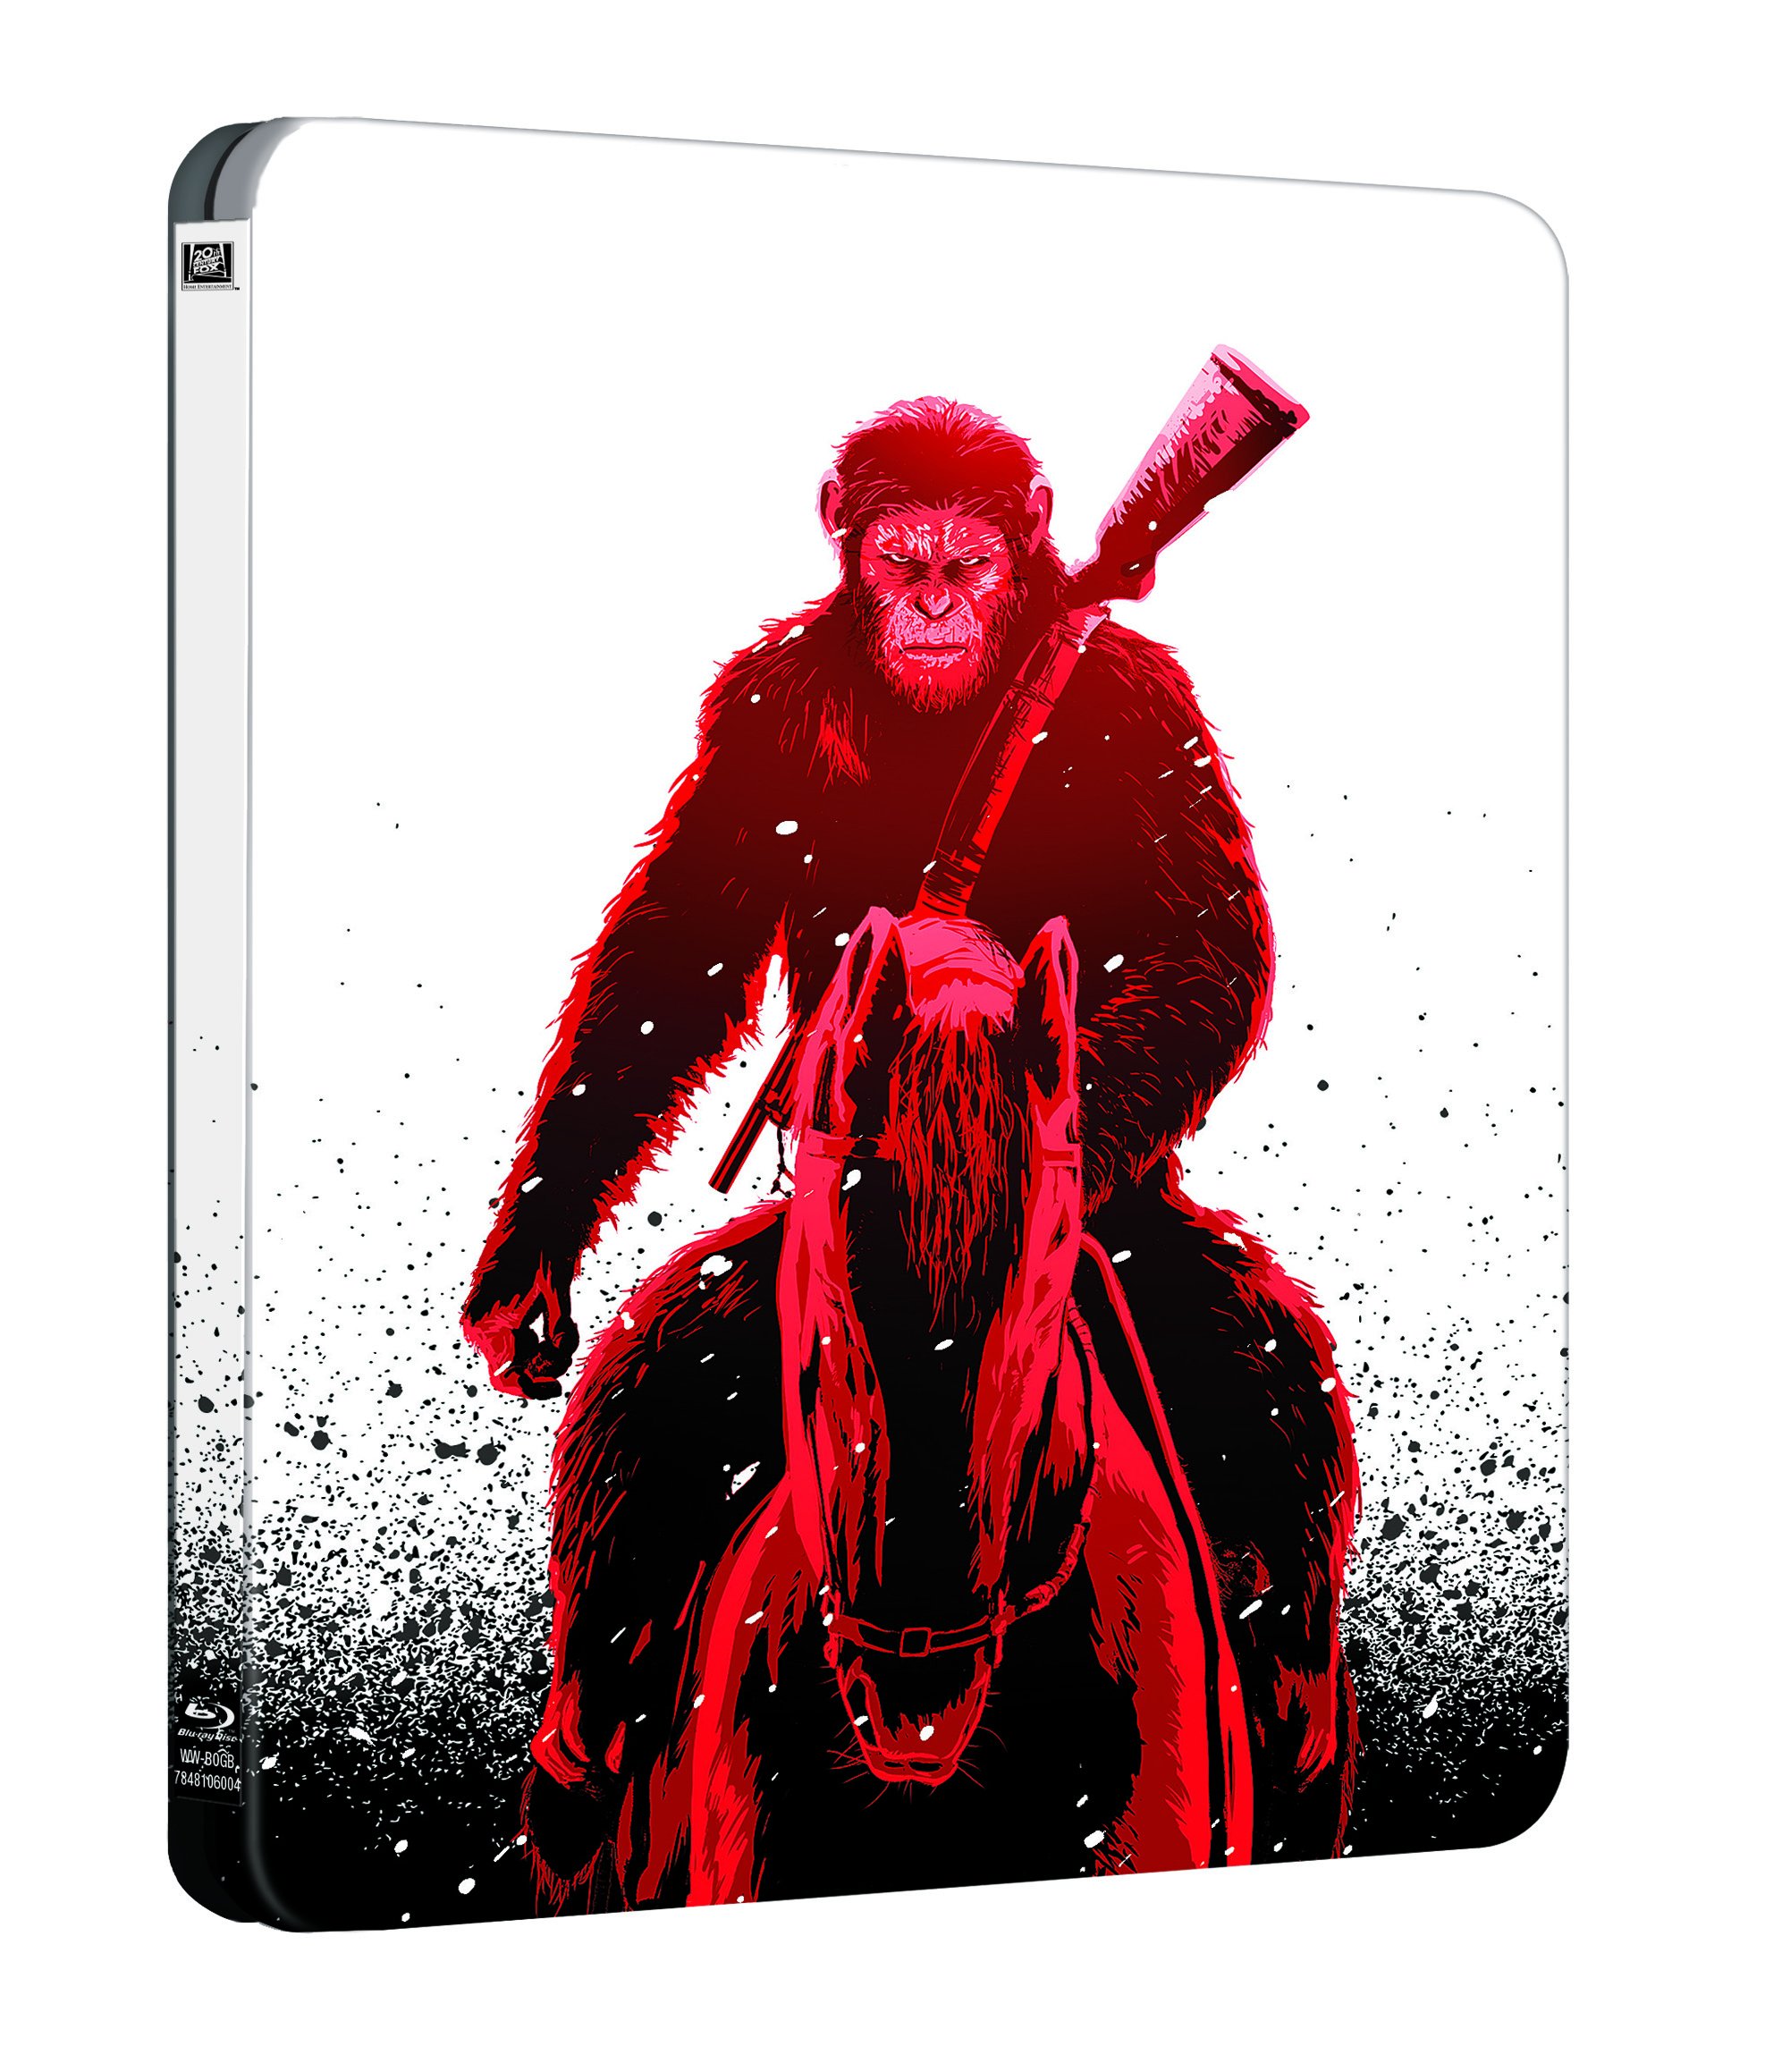 war-for-the-planet-of-the-apes-steelbook-movie-purchase-or-watch-onlin